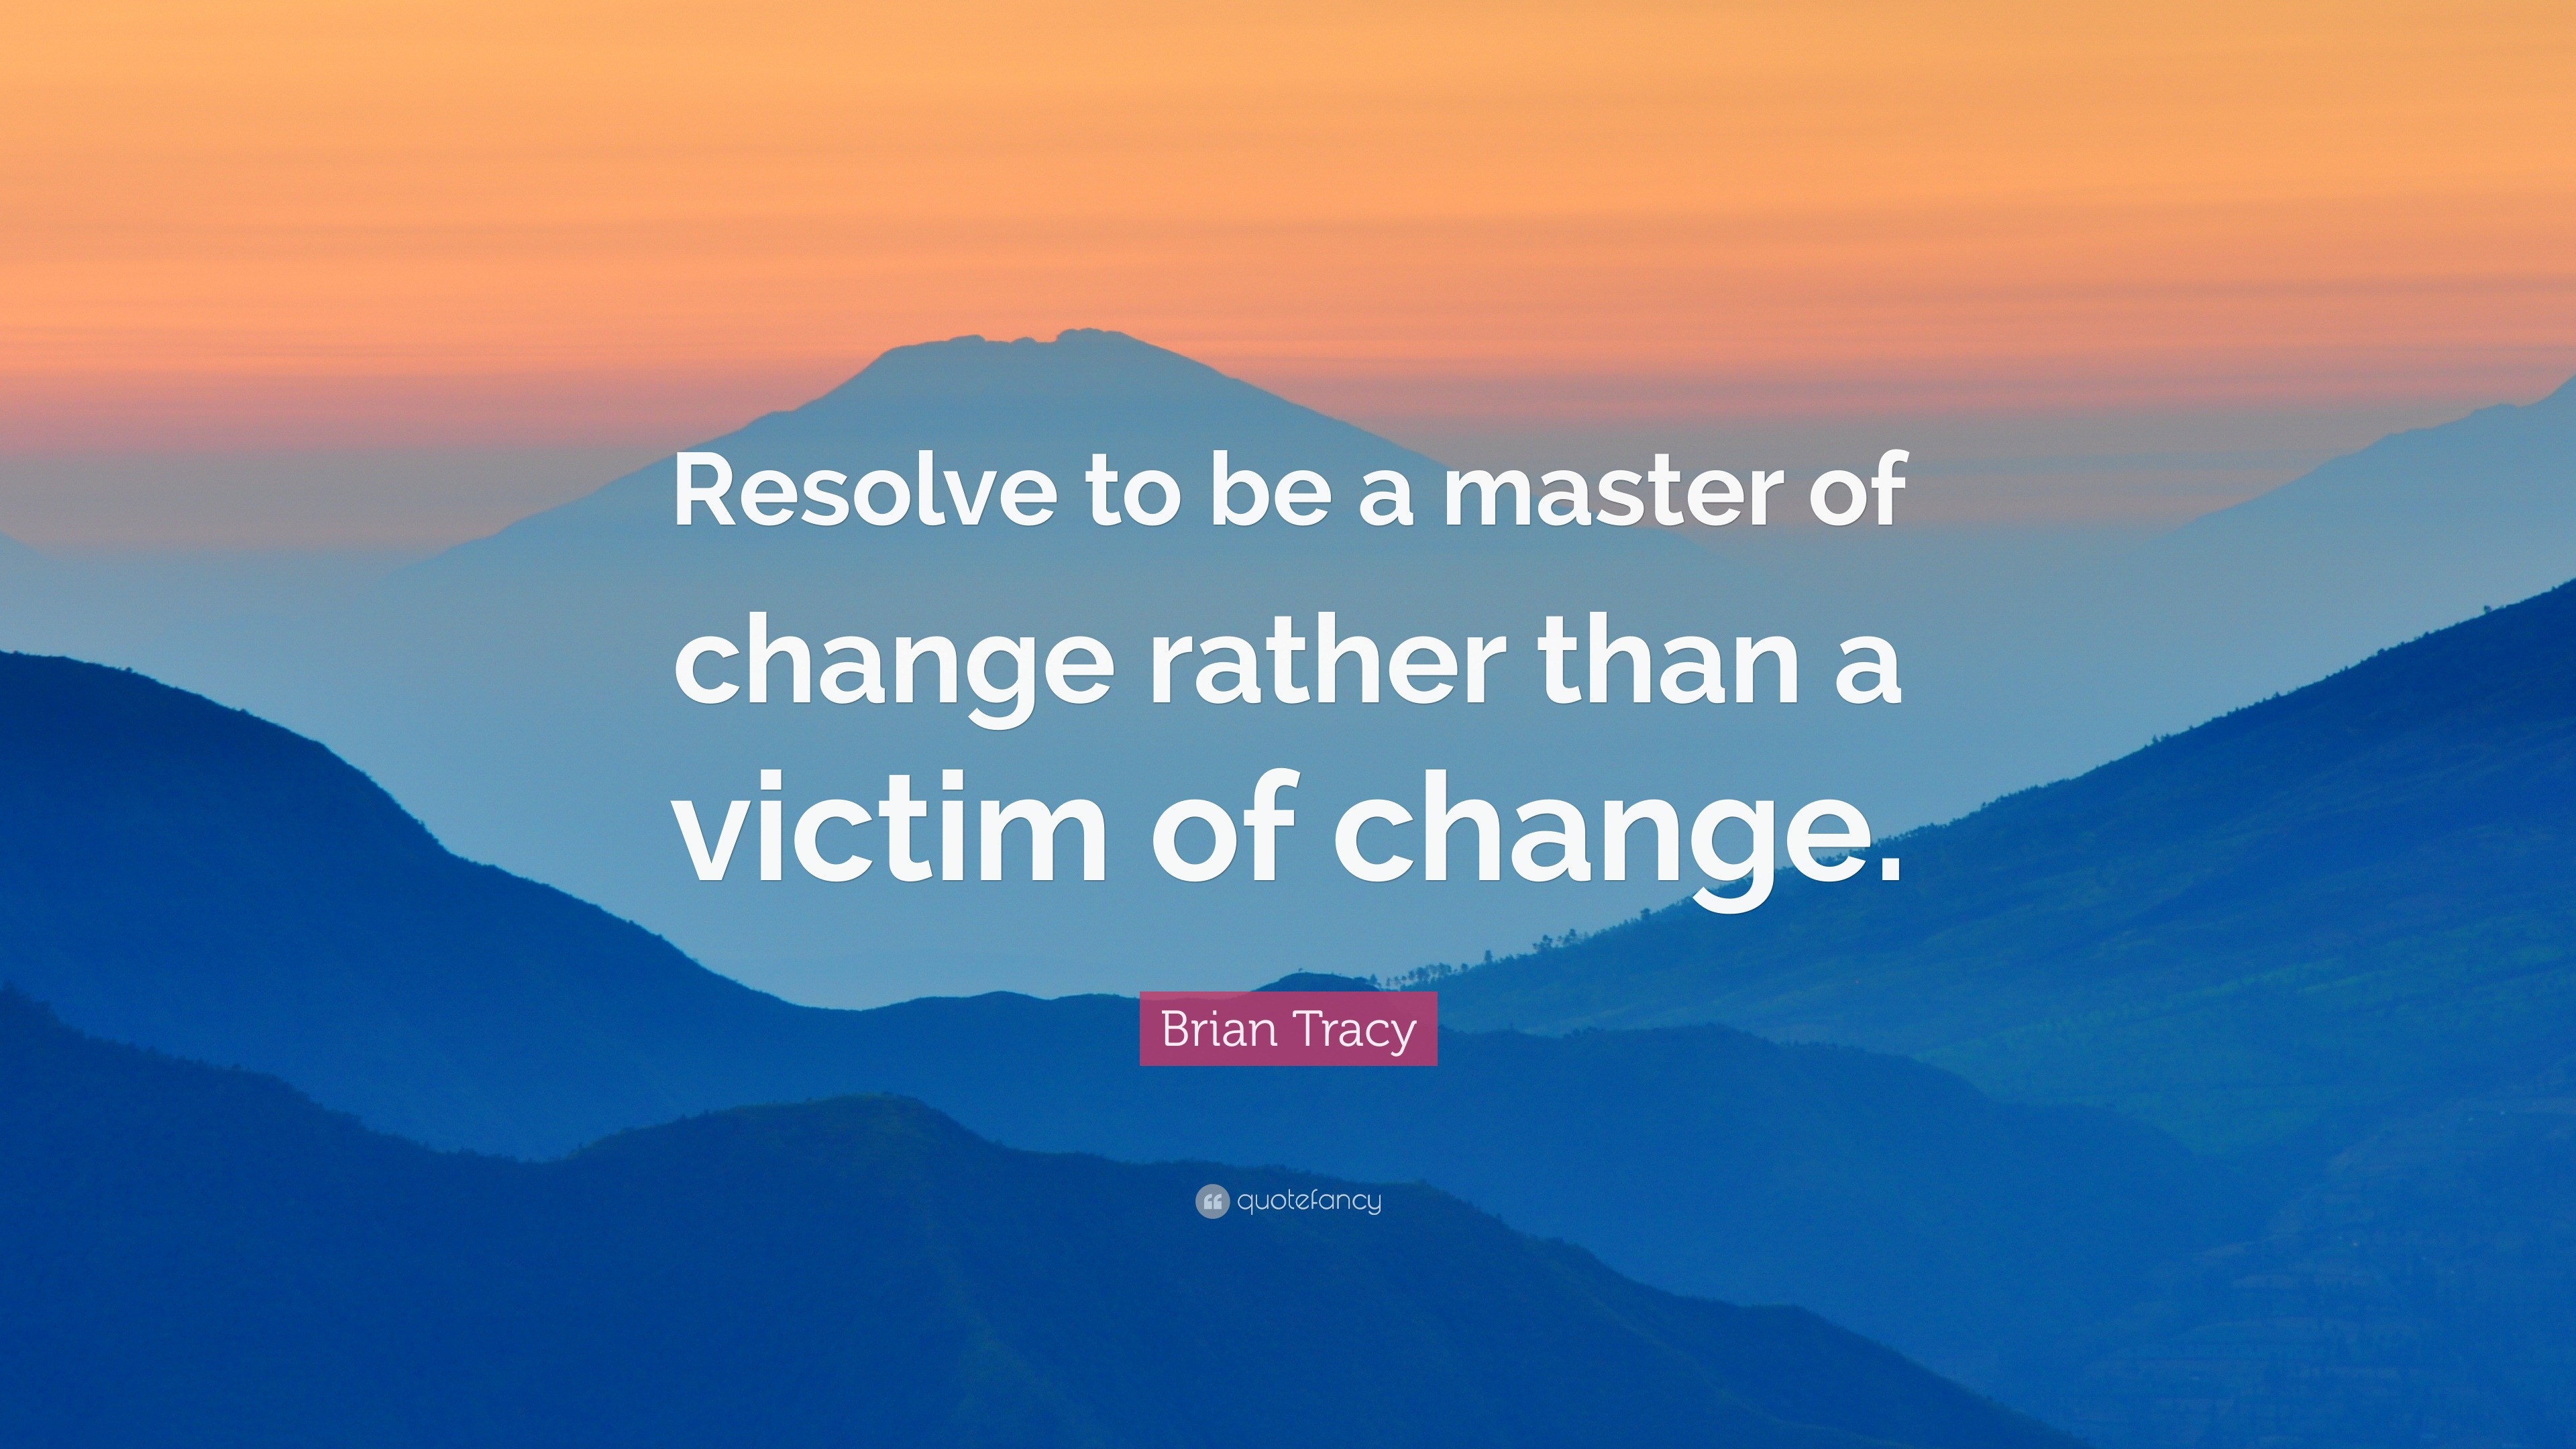 Brian Tracy Quote: “Resolve to be a master of change rather than a ...